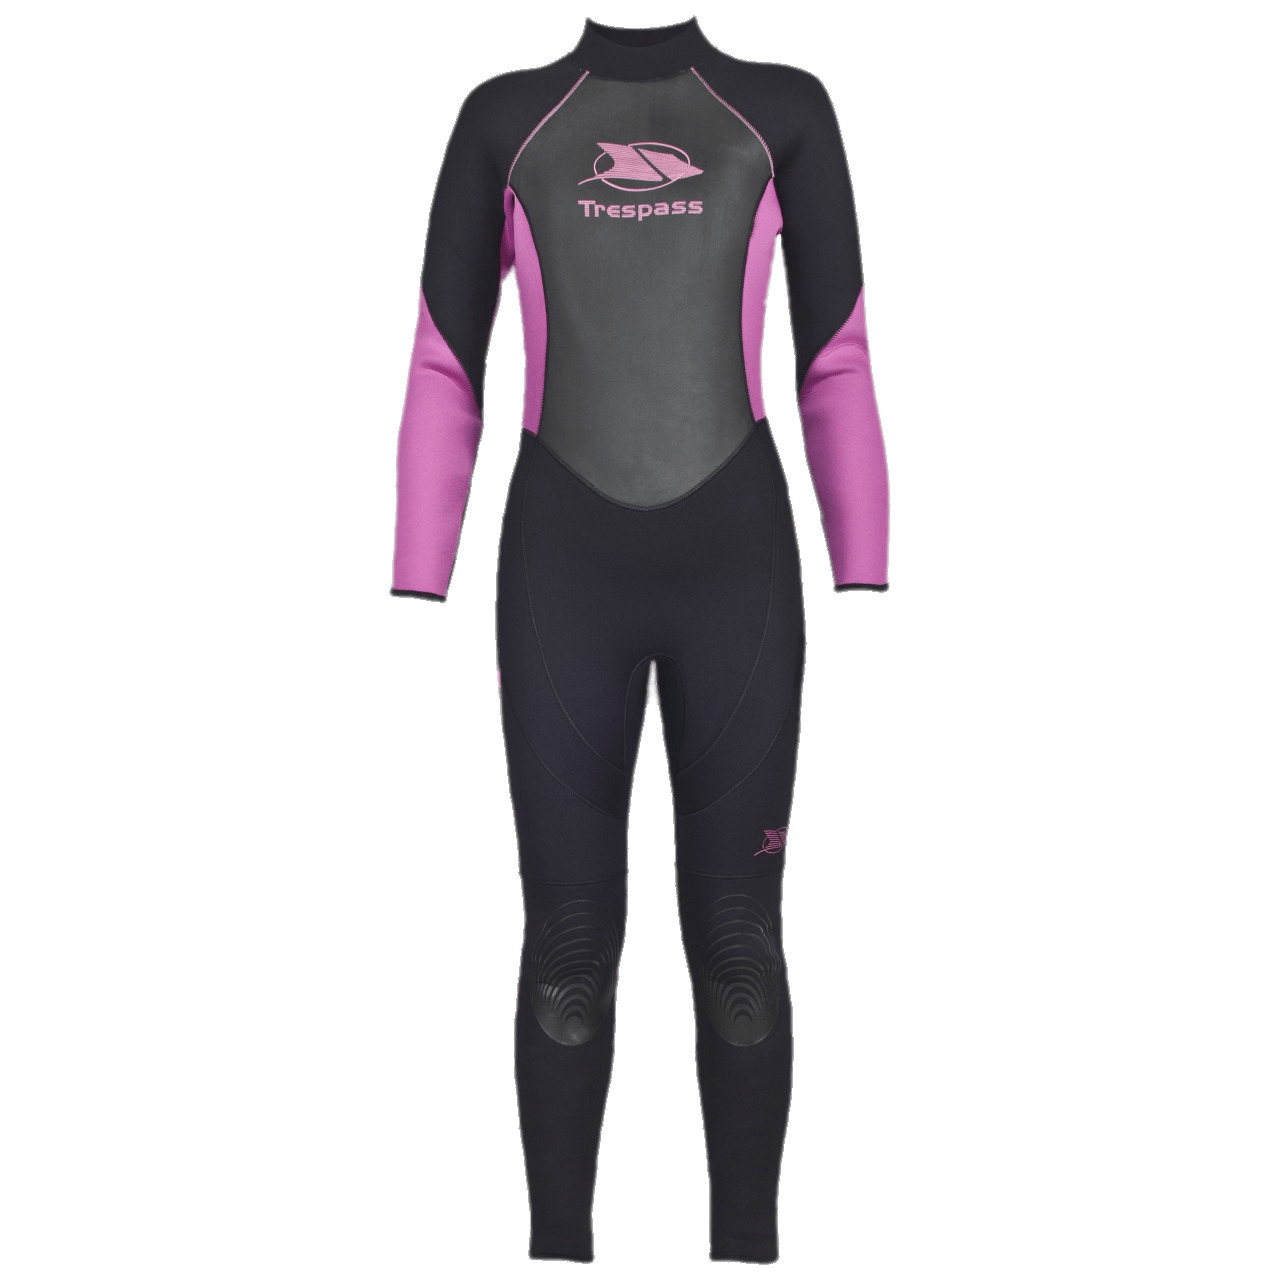 Trespass Wetsuit For Women icons